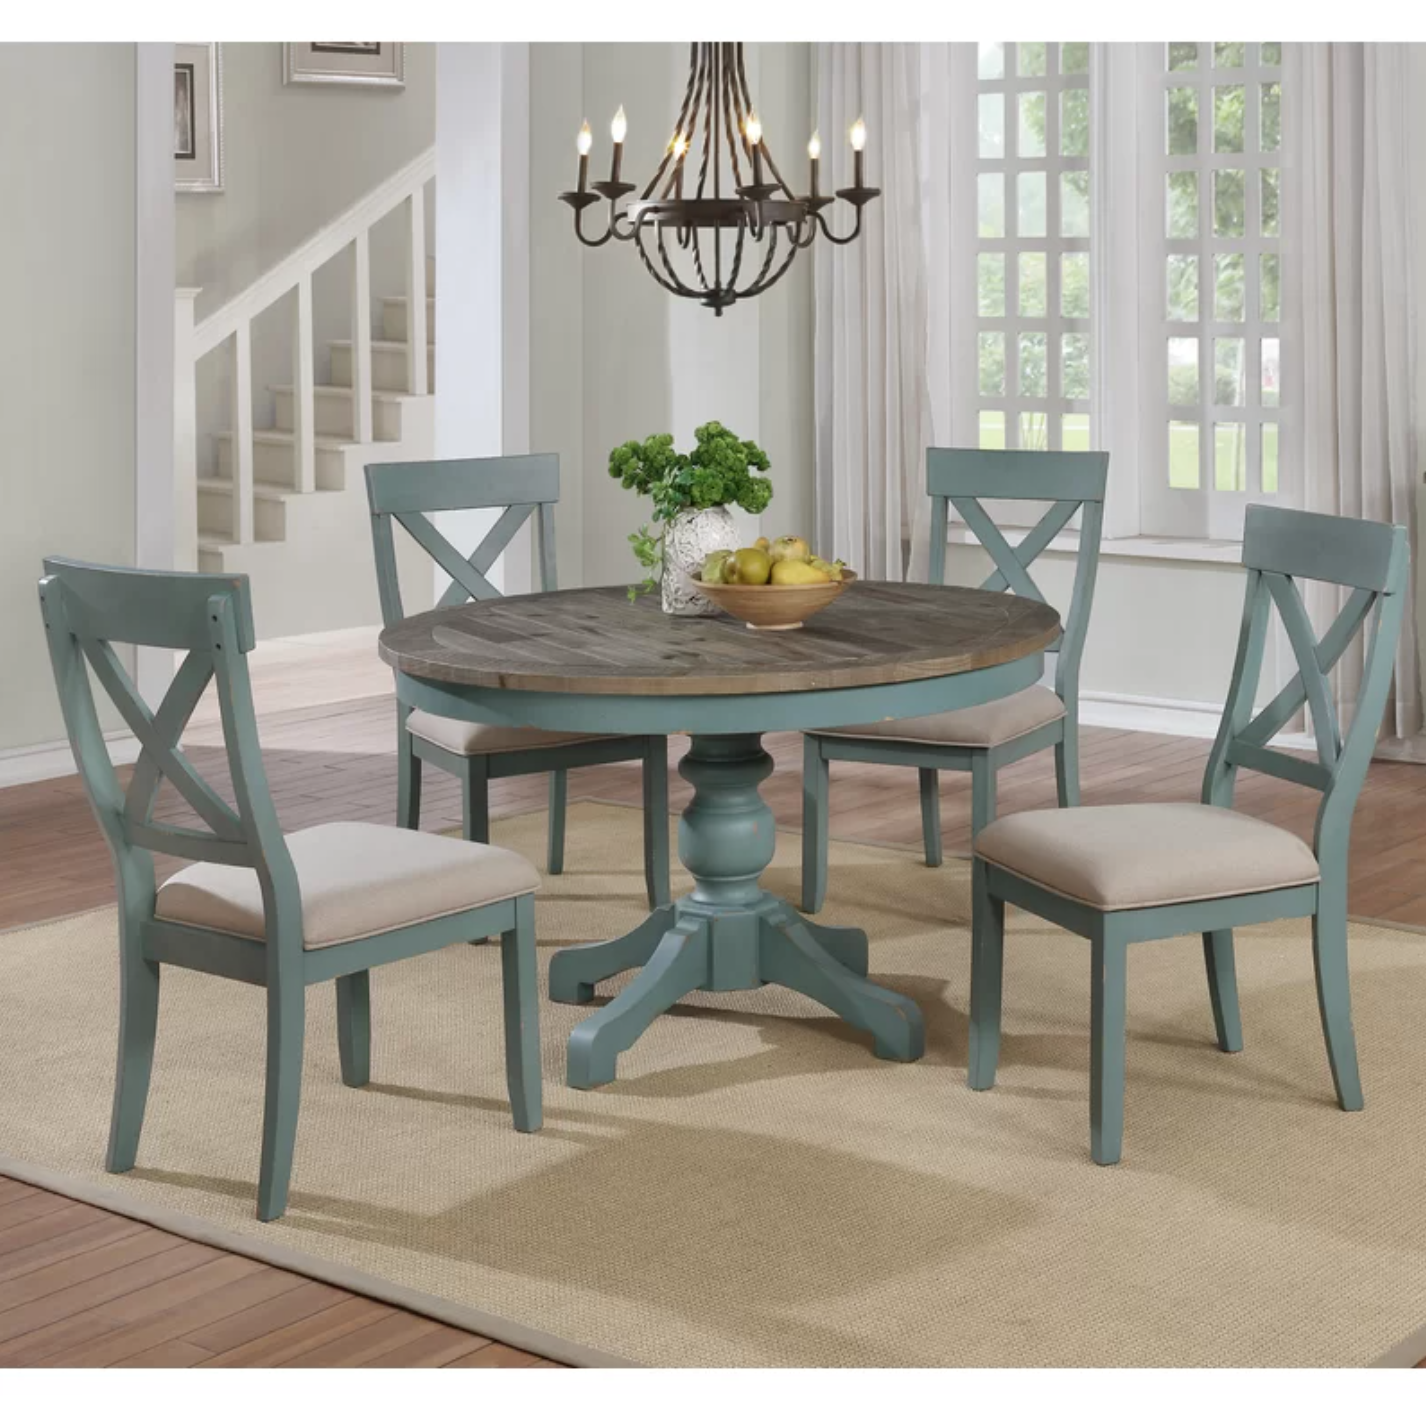 Design of Dining Table